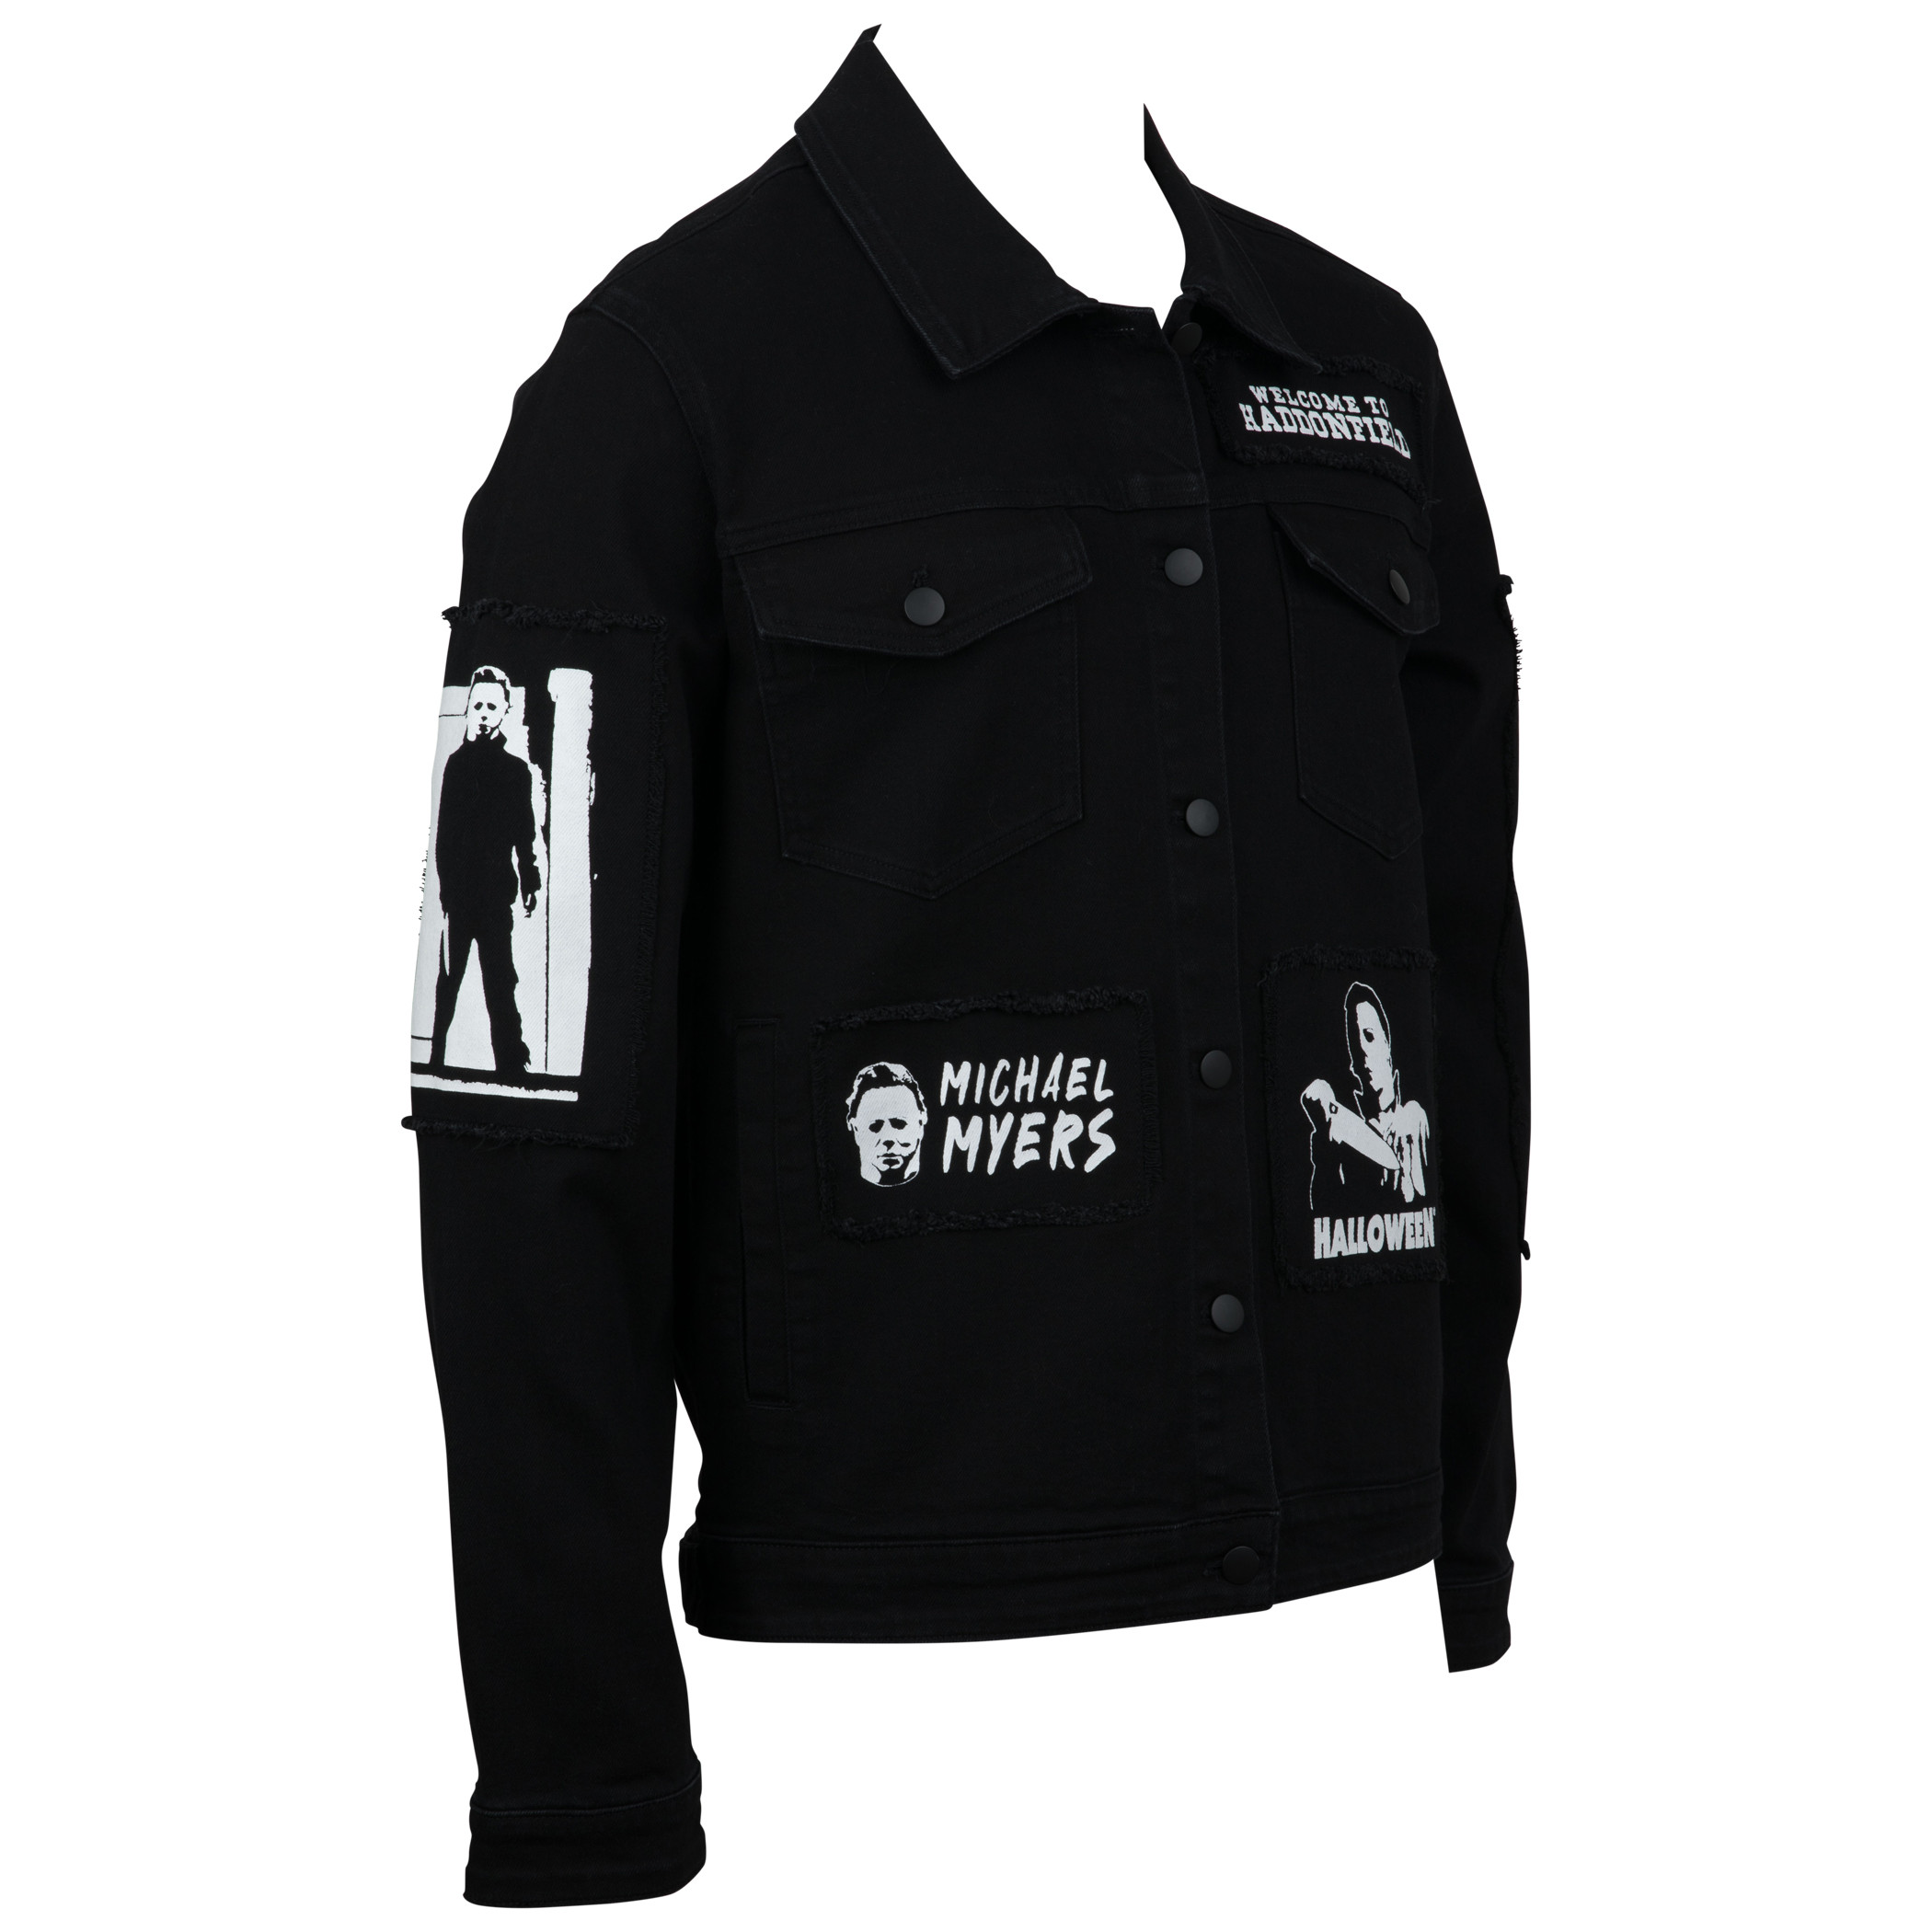 Halloween Michael Meyers Denim Jacket with Sewn Patches